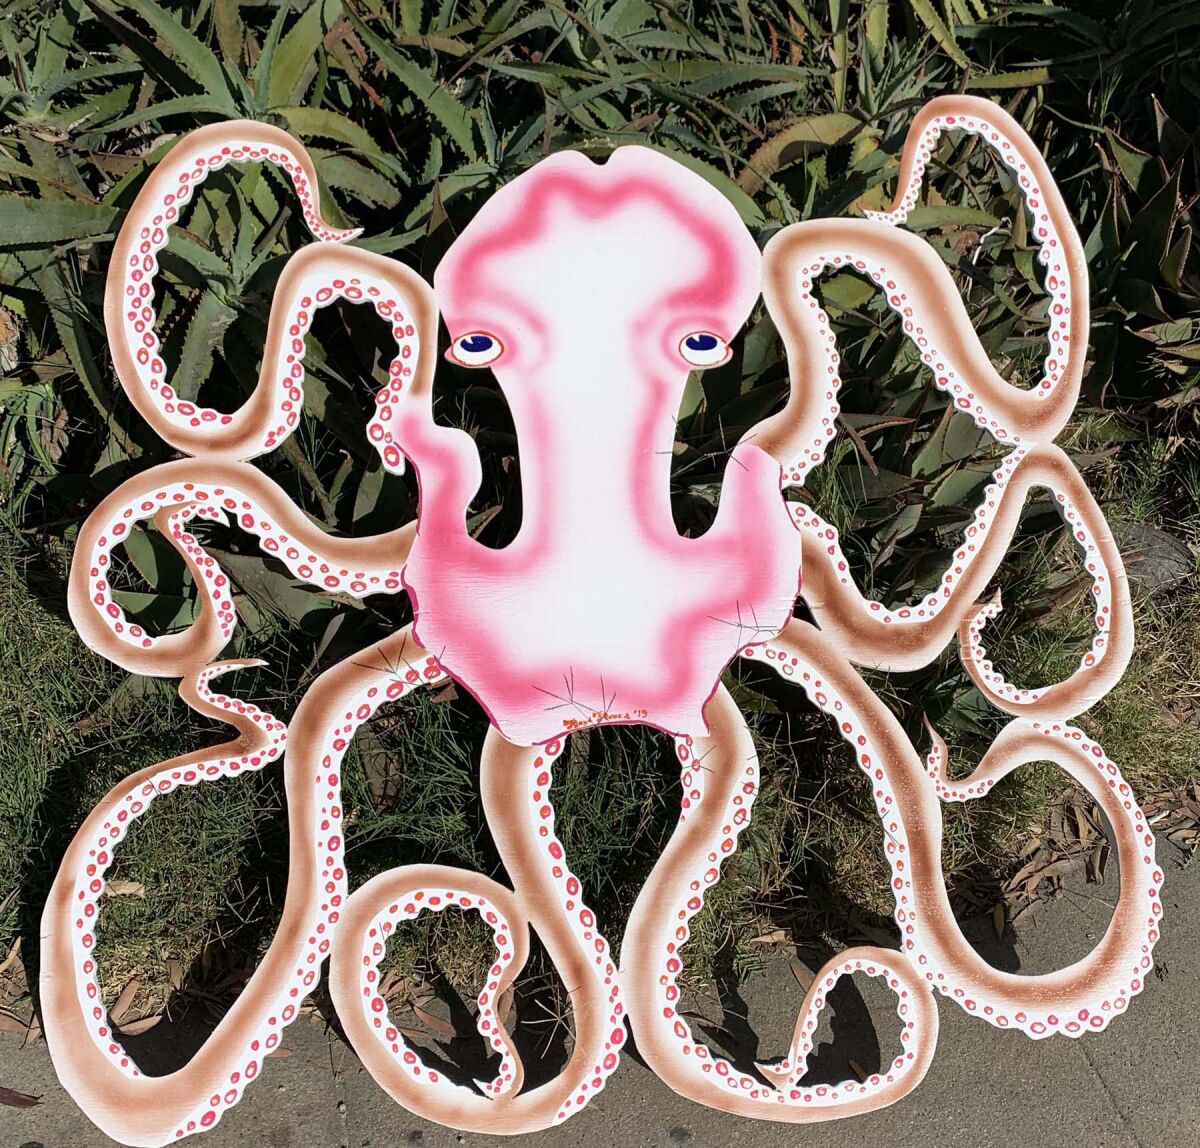 A plywoodensis of an octopus.